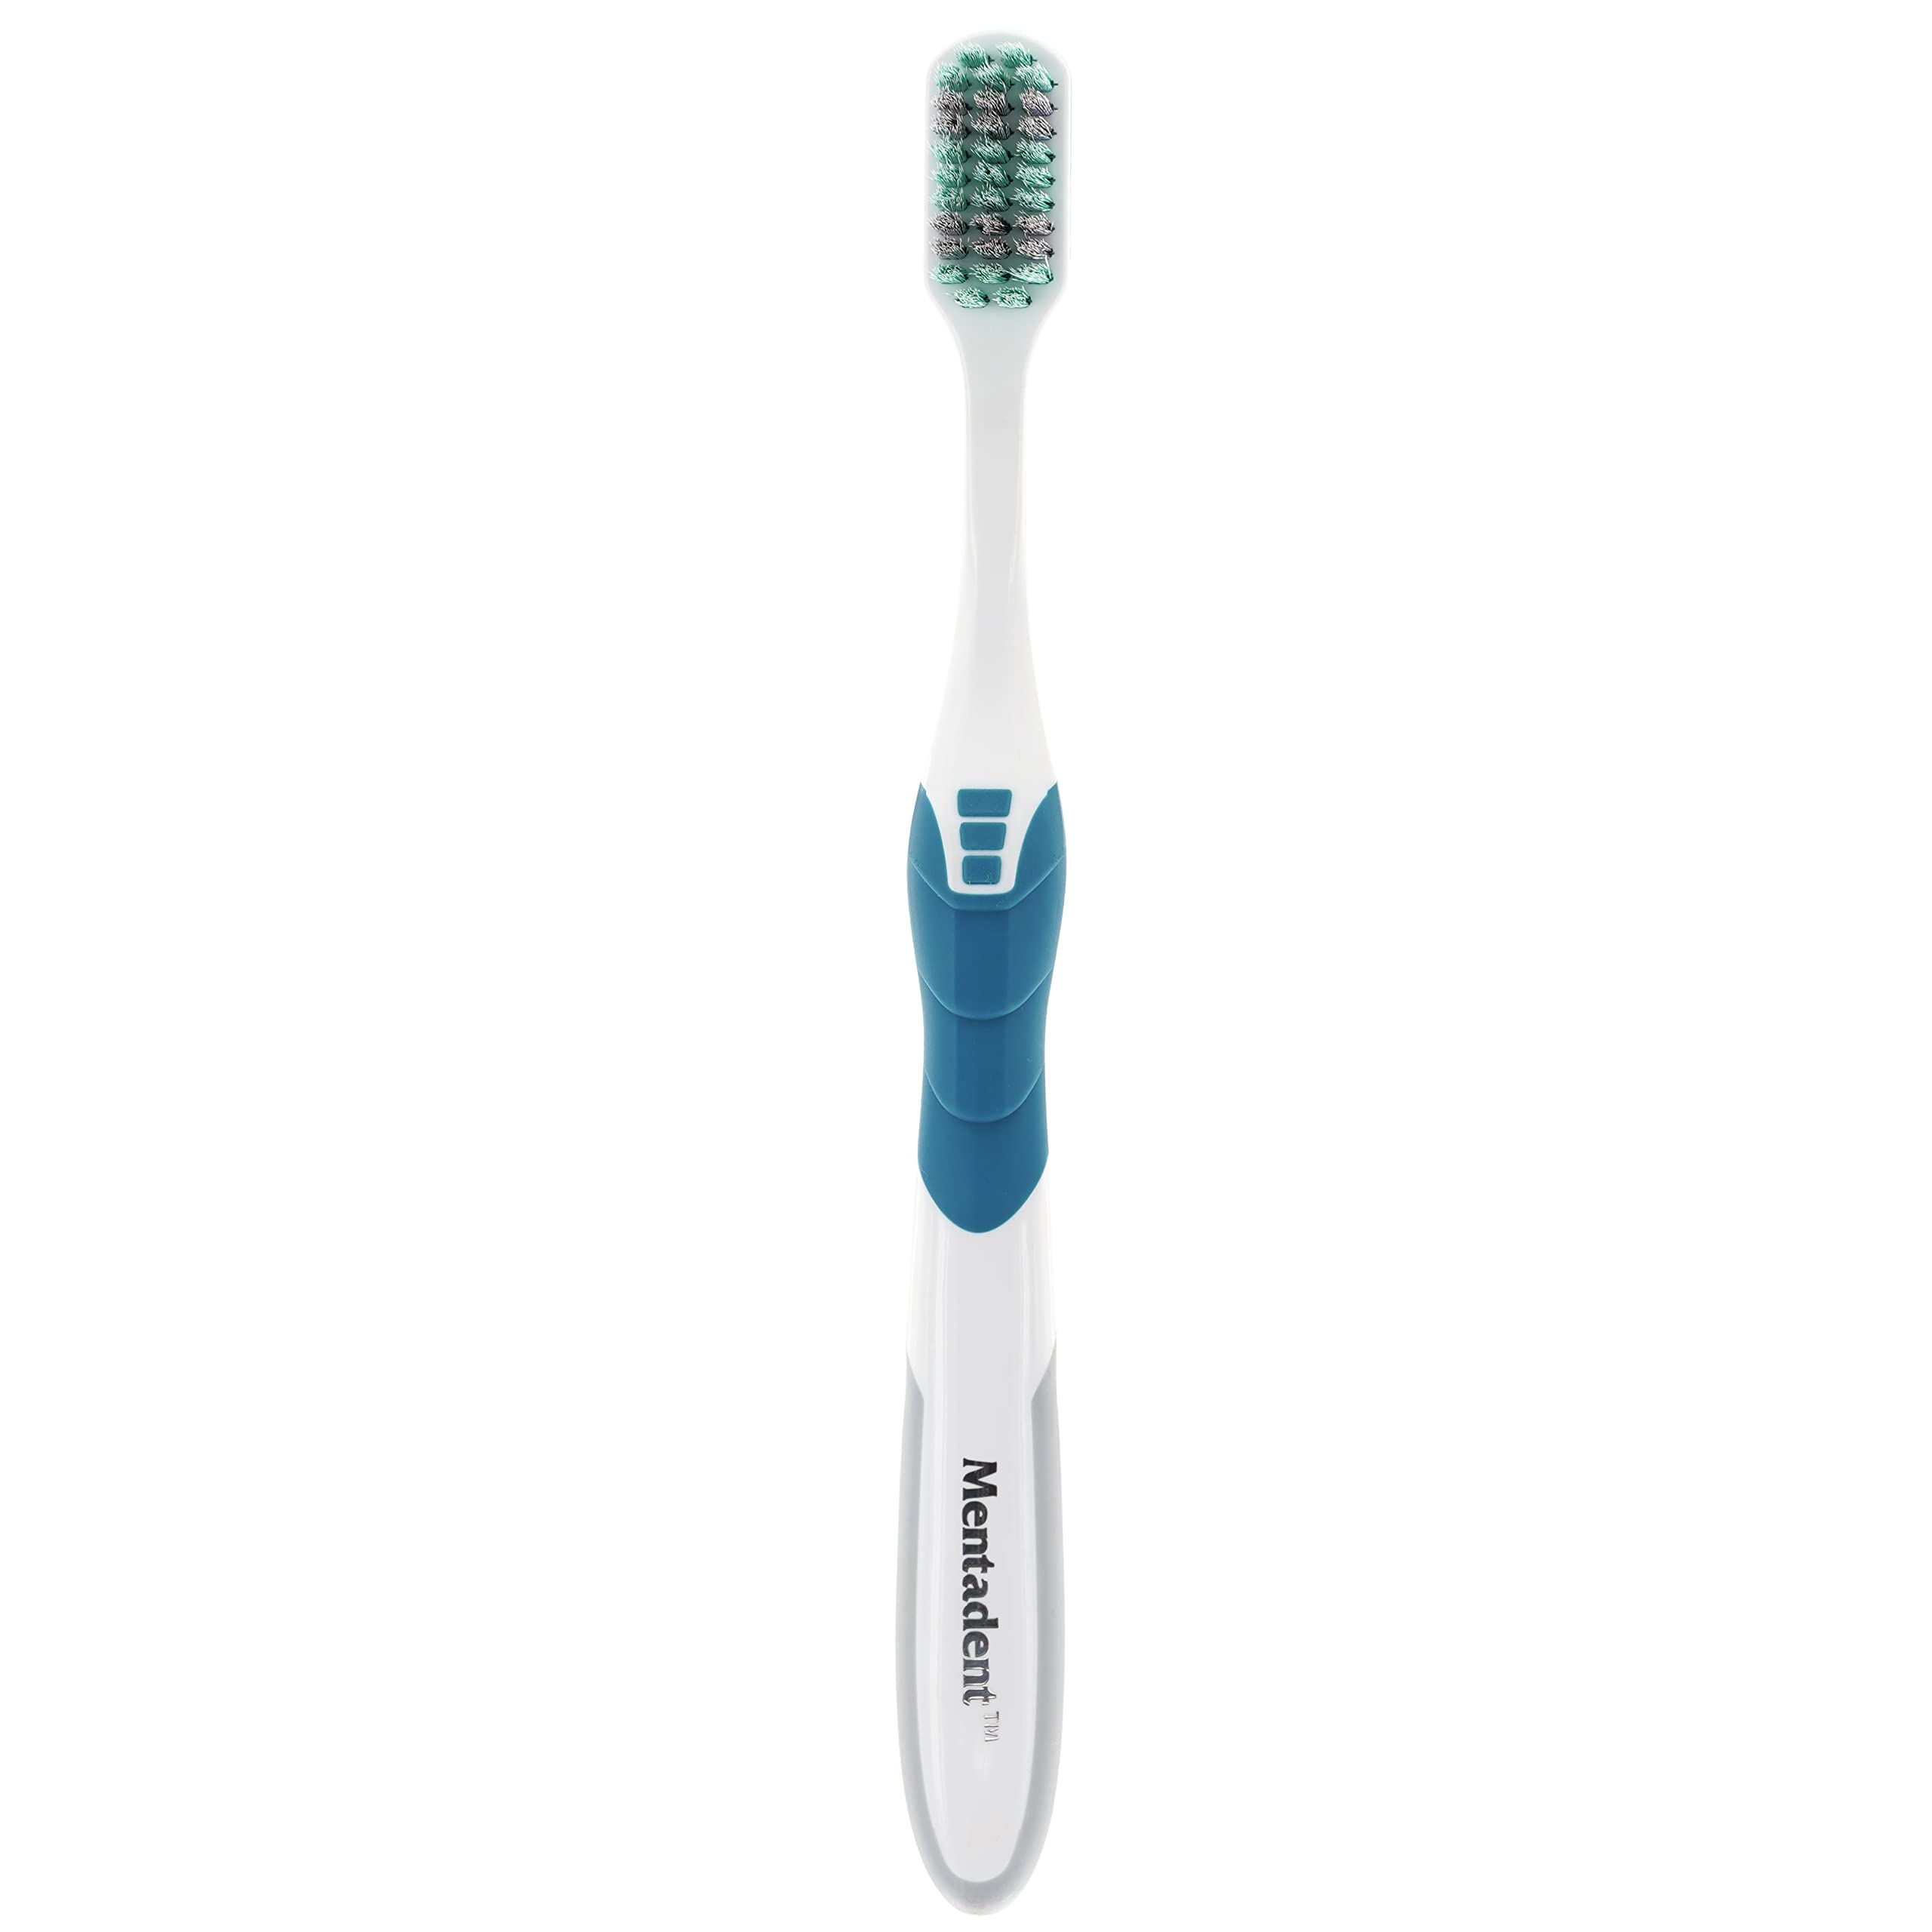 GuruNanda Mentadent Toothbrush Soft Toothbrush for Kids & Adults, Tooth Brush for Teeth Whitening, Travel Toothbrushes, Soft Bristles for Your Sensitive Gums, Multicolor (20-22-001-08108-24)